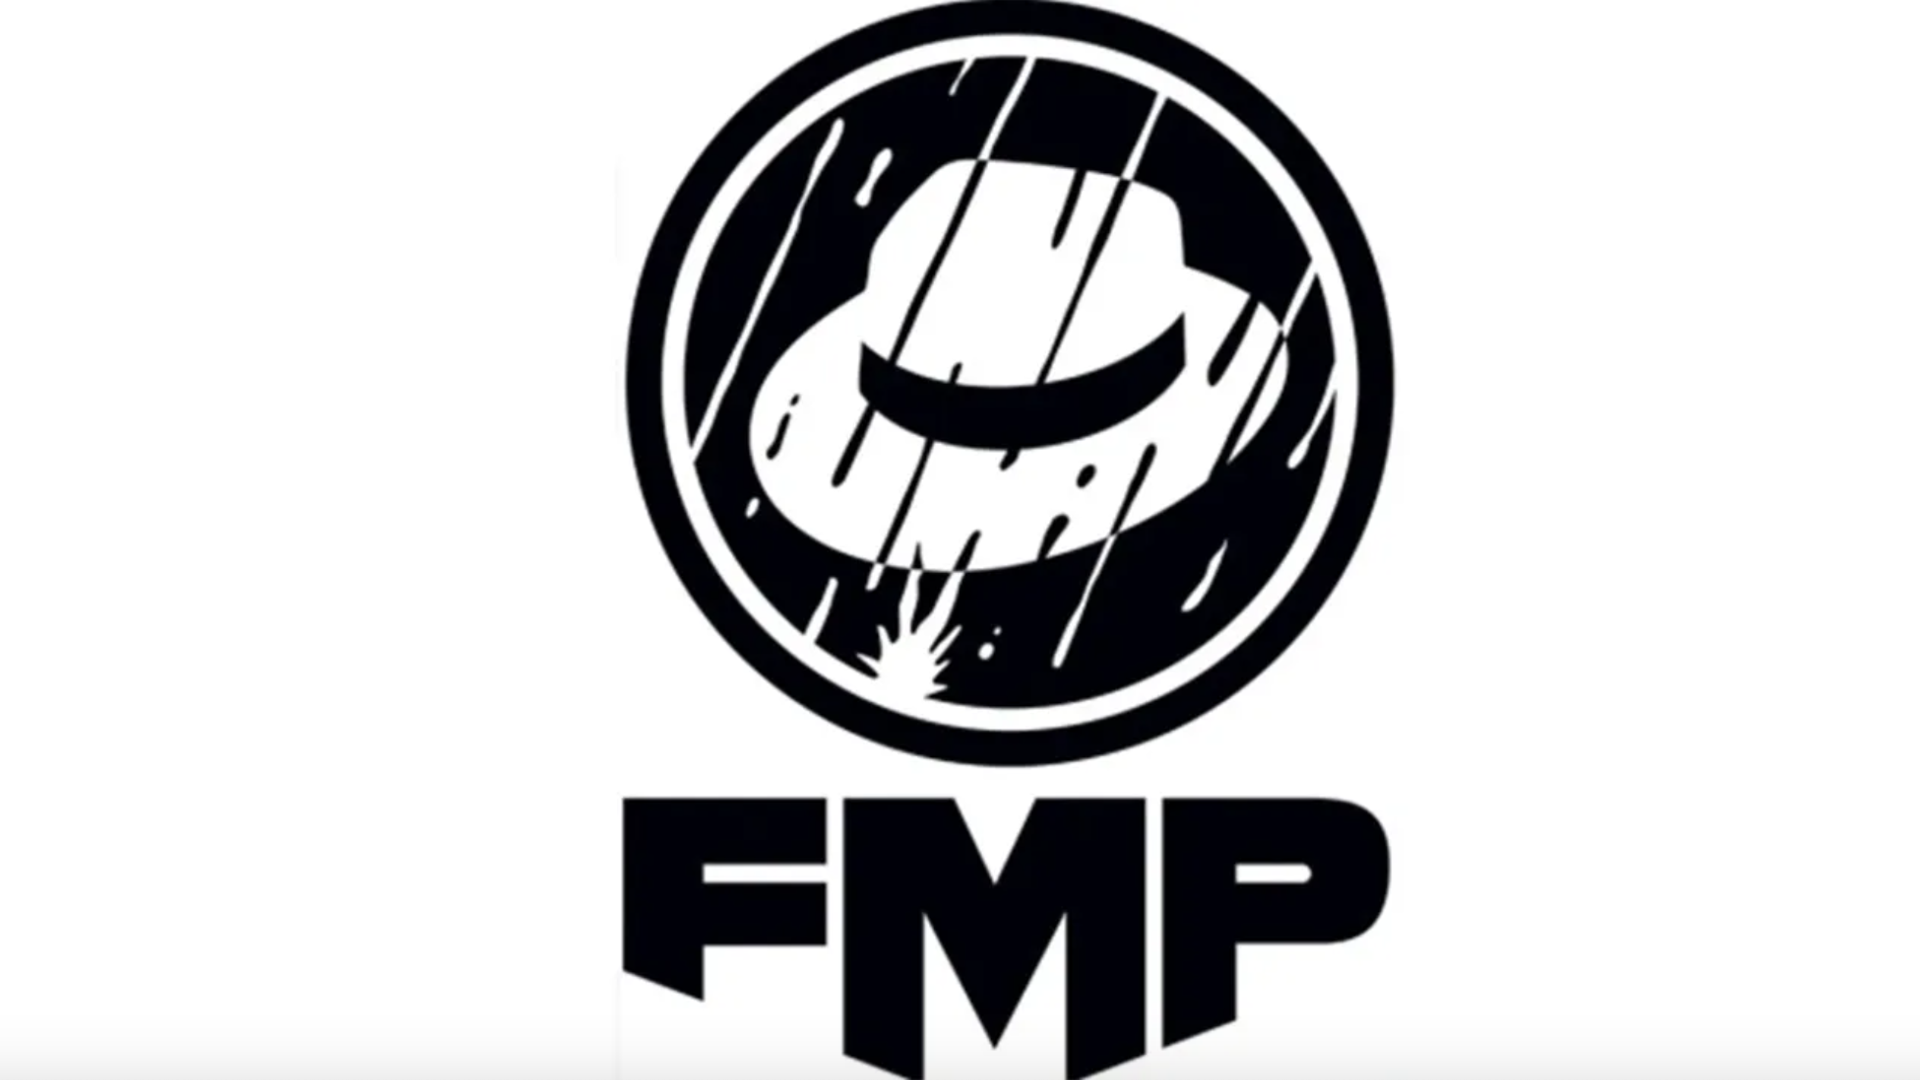 Frank Miller and Dan DiDio’s new publisher FMP signs deal with Diamond